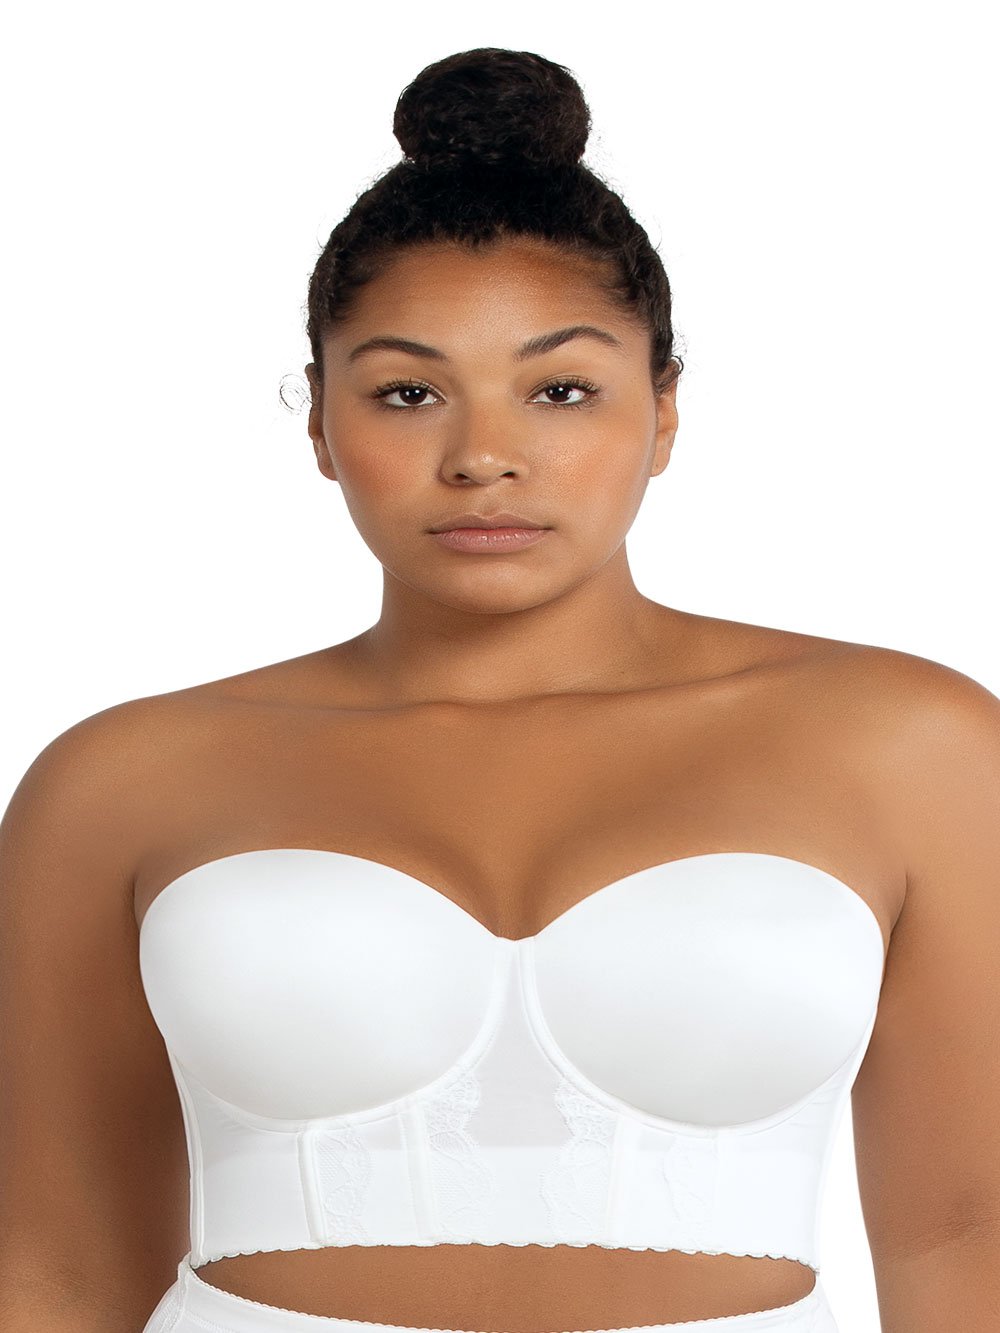 Bras, Sexy Bras, Strapless, Push Ups, B, C, DD Cup Bras, Plus Size Tagged  Plus Size Bustier - HauteFlair